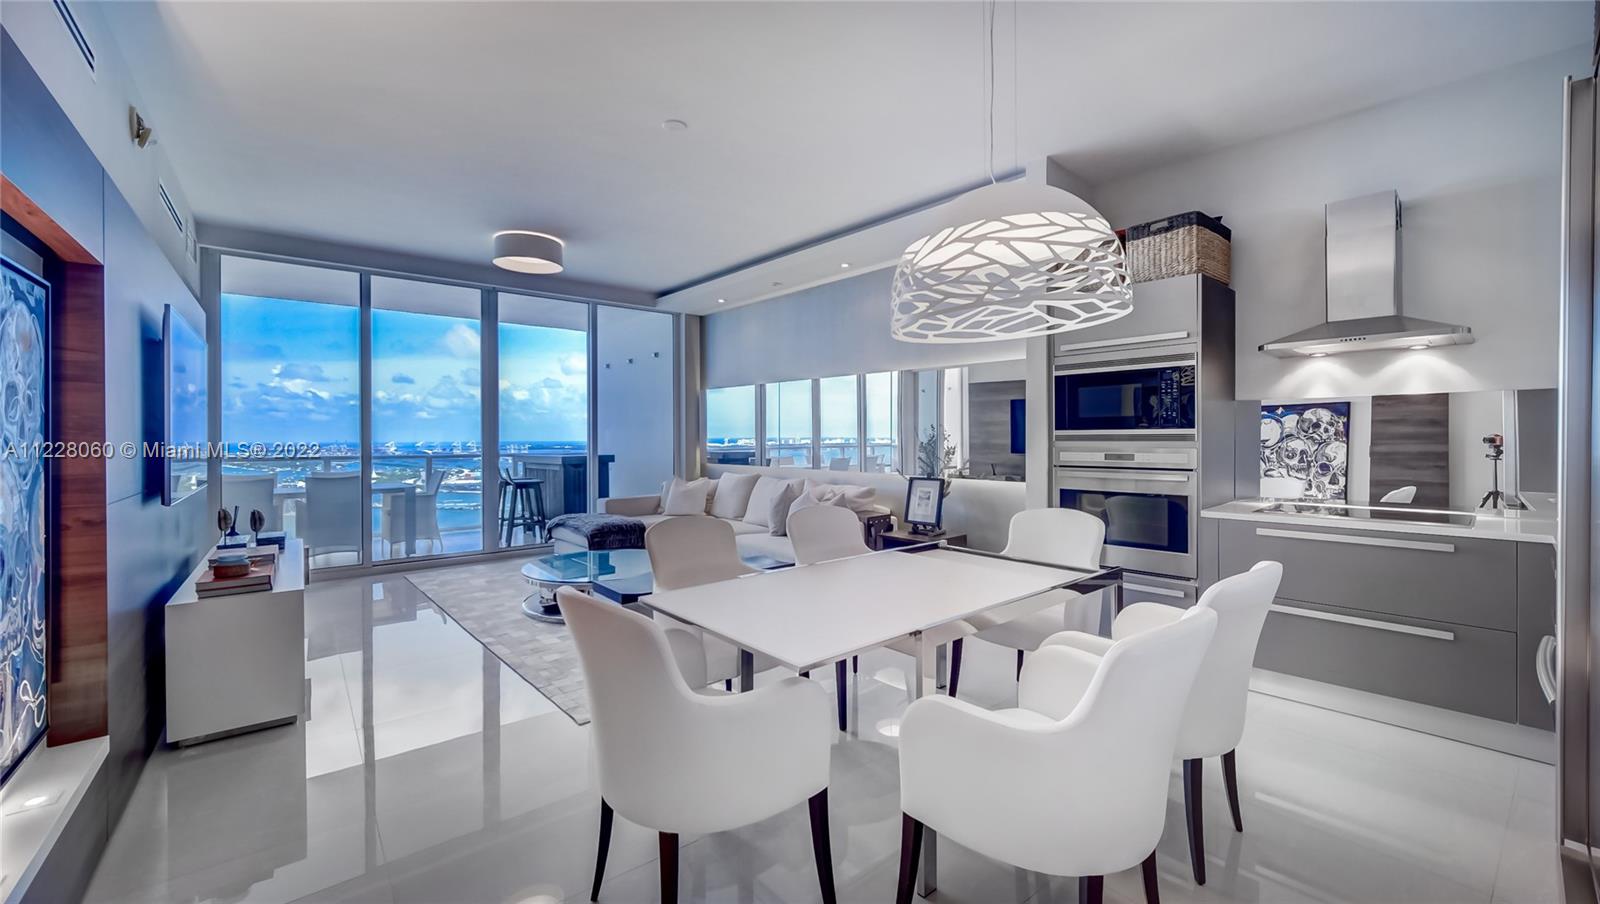 This stylish & spacious 1 bed + bonus room/2 bath unit is nestled on N Bayshore Drive, the most sought-out waterfront street in Edgewater at the elegant Paramount Bay. Set on the rarely available & best selling 4th tower, via a private elevator, you arrive to your own lobby! Features: Sophisticated airy space flows between the 8' deep terraces & its 10' ceilings you'll love waking up to unobstructed endless water-views thanks to floor to ceiling glass doors. The open kitchen incl Sub-zero appliances, gorgeous floors, custom built-ins, w/d. The Master suite: walk-in closet, dual sink & shower. Luxurious amenities are the core essence of living here from it's sunrise/sunset pools, 2-level full-service fitness center & spa, game room, lounge areas, library, 24hr security, concierge + more.